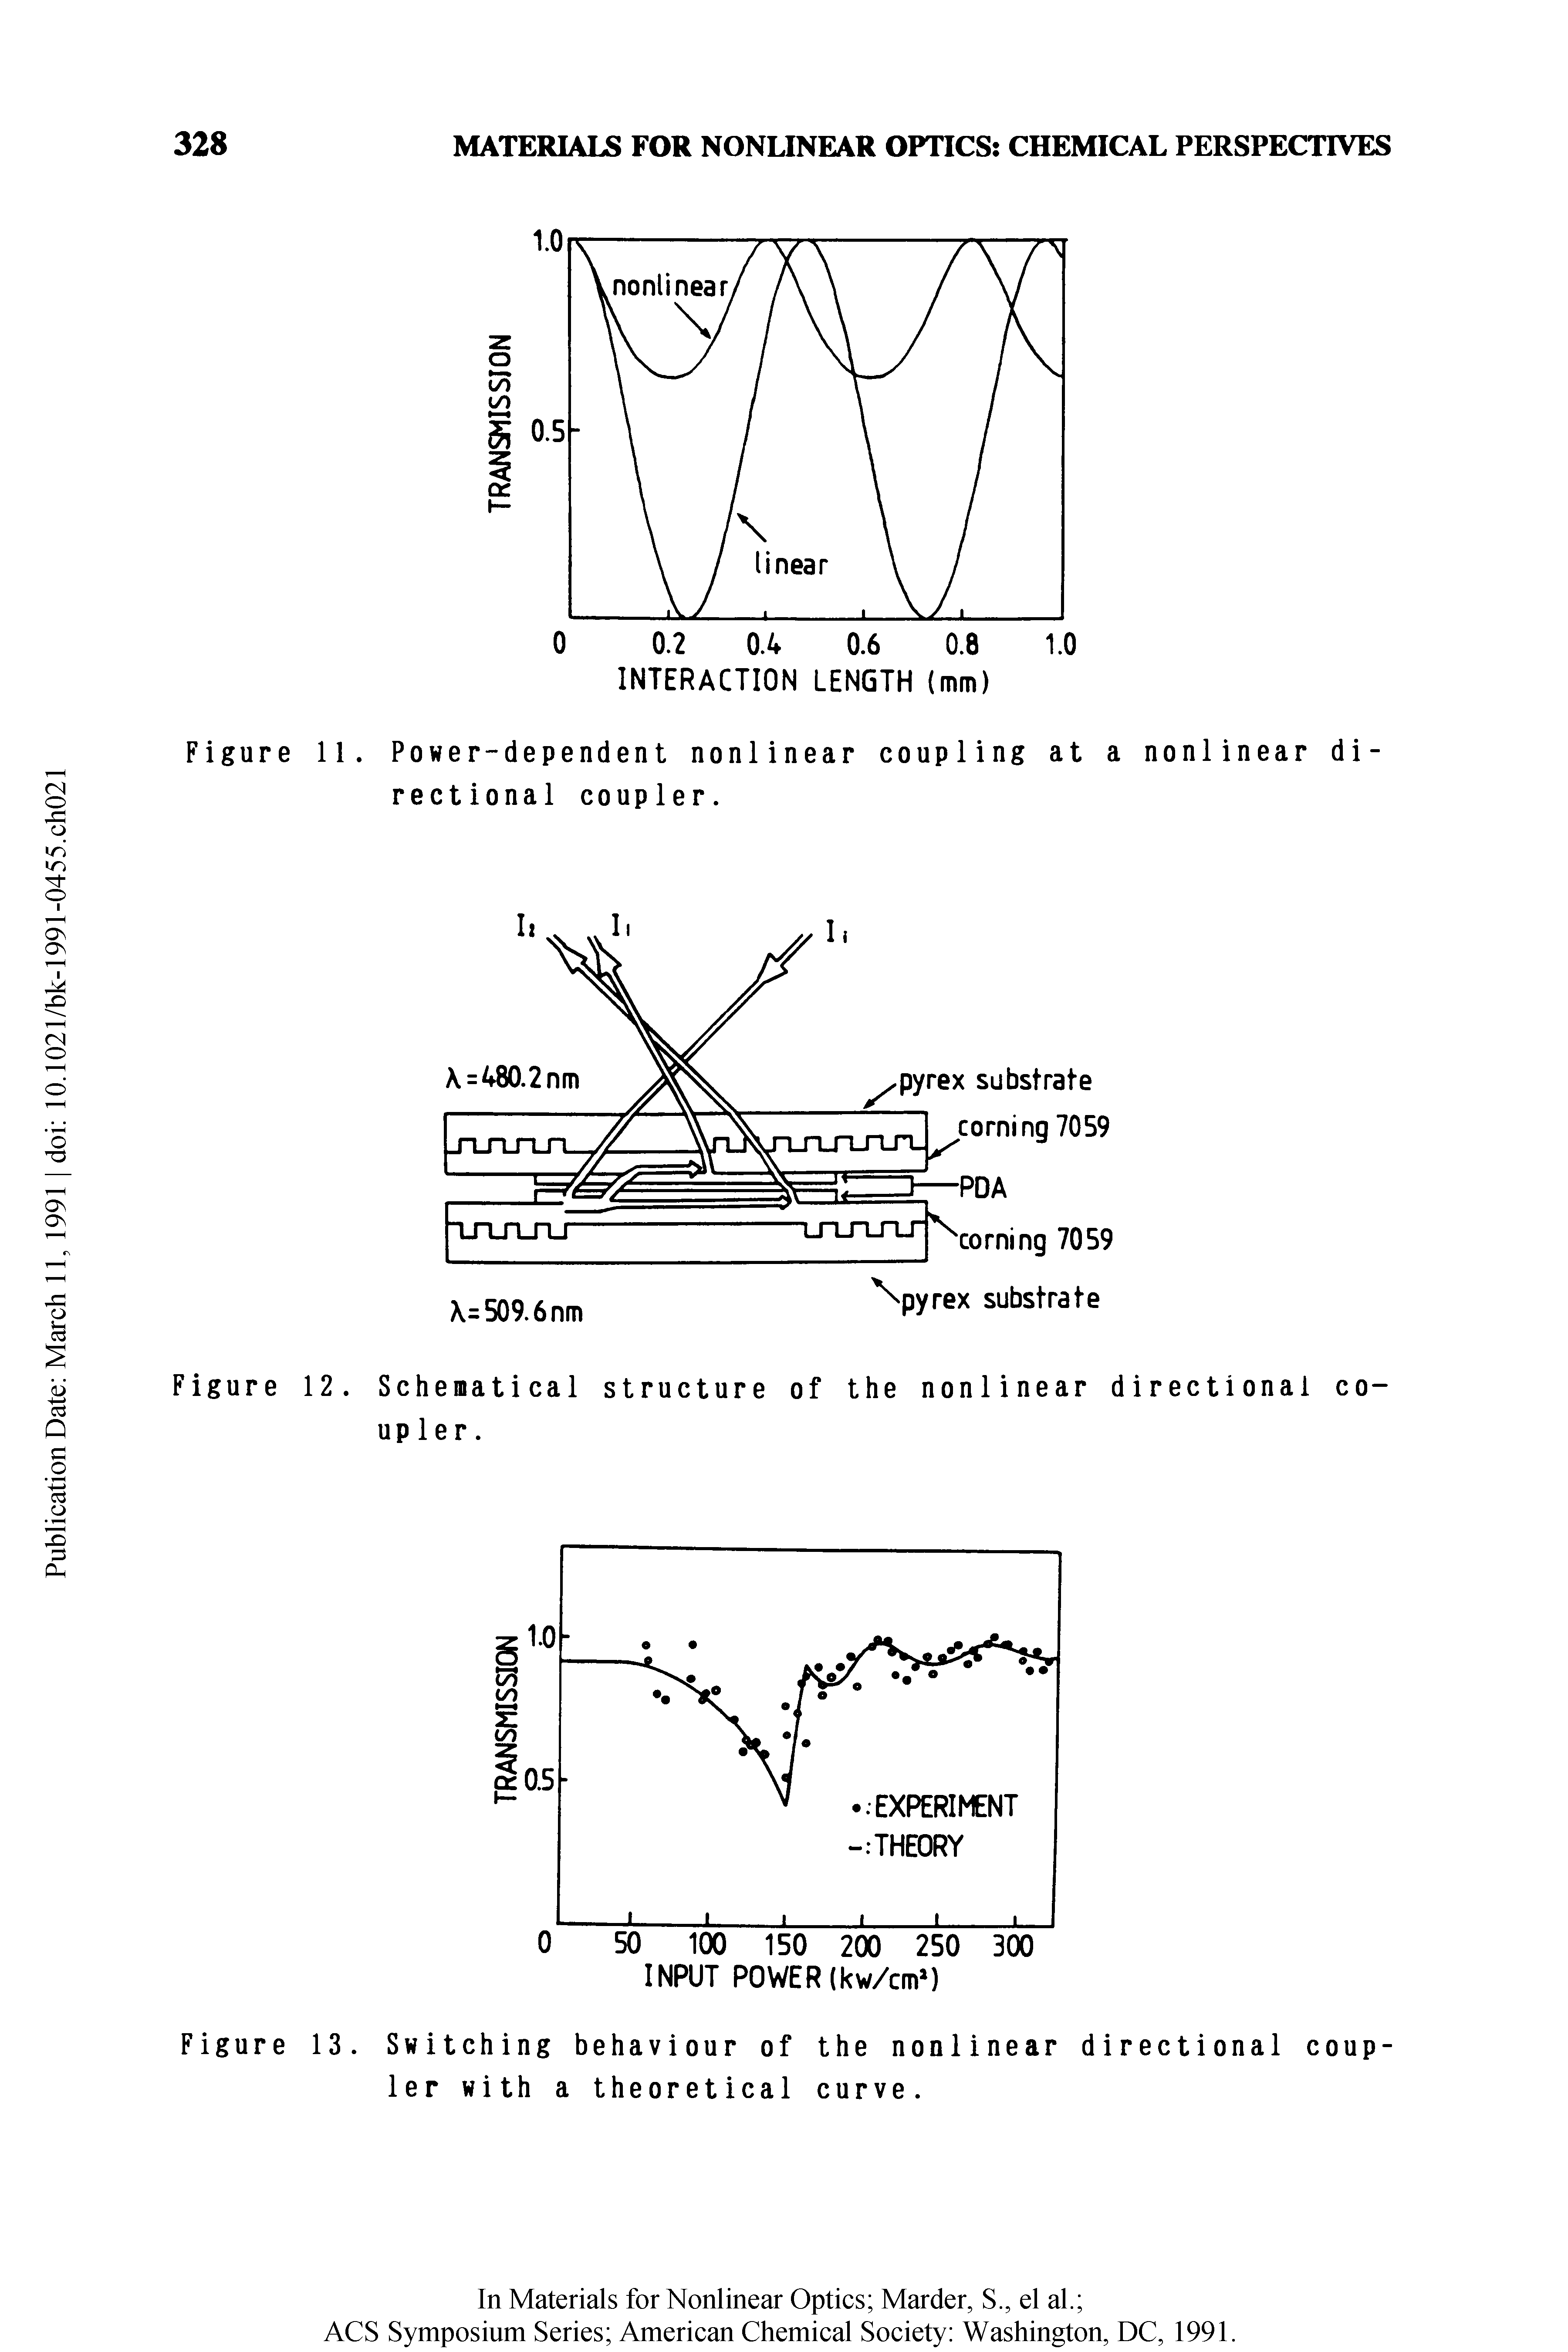 Figure 11. Power-dependent nonlinear coupling at a nonlinear directional coupler.